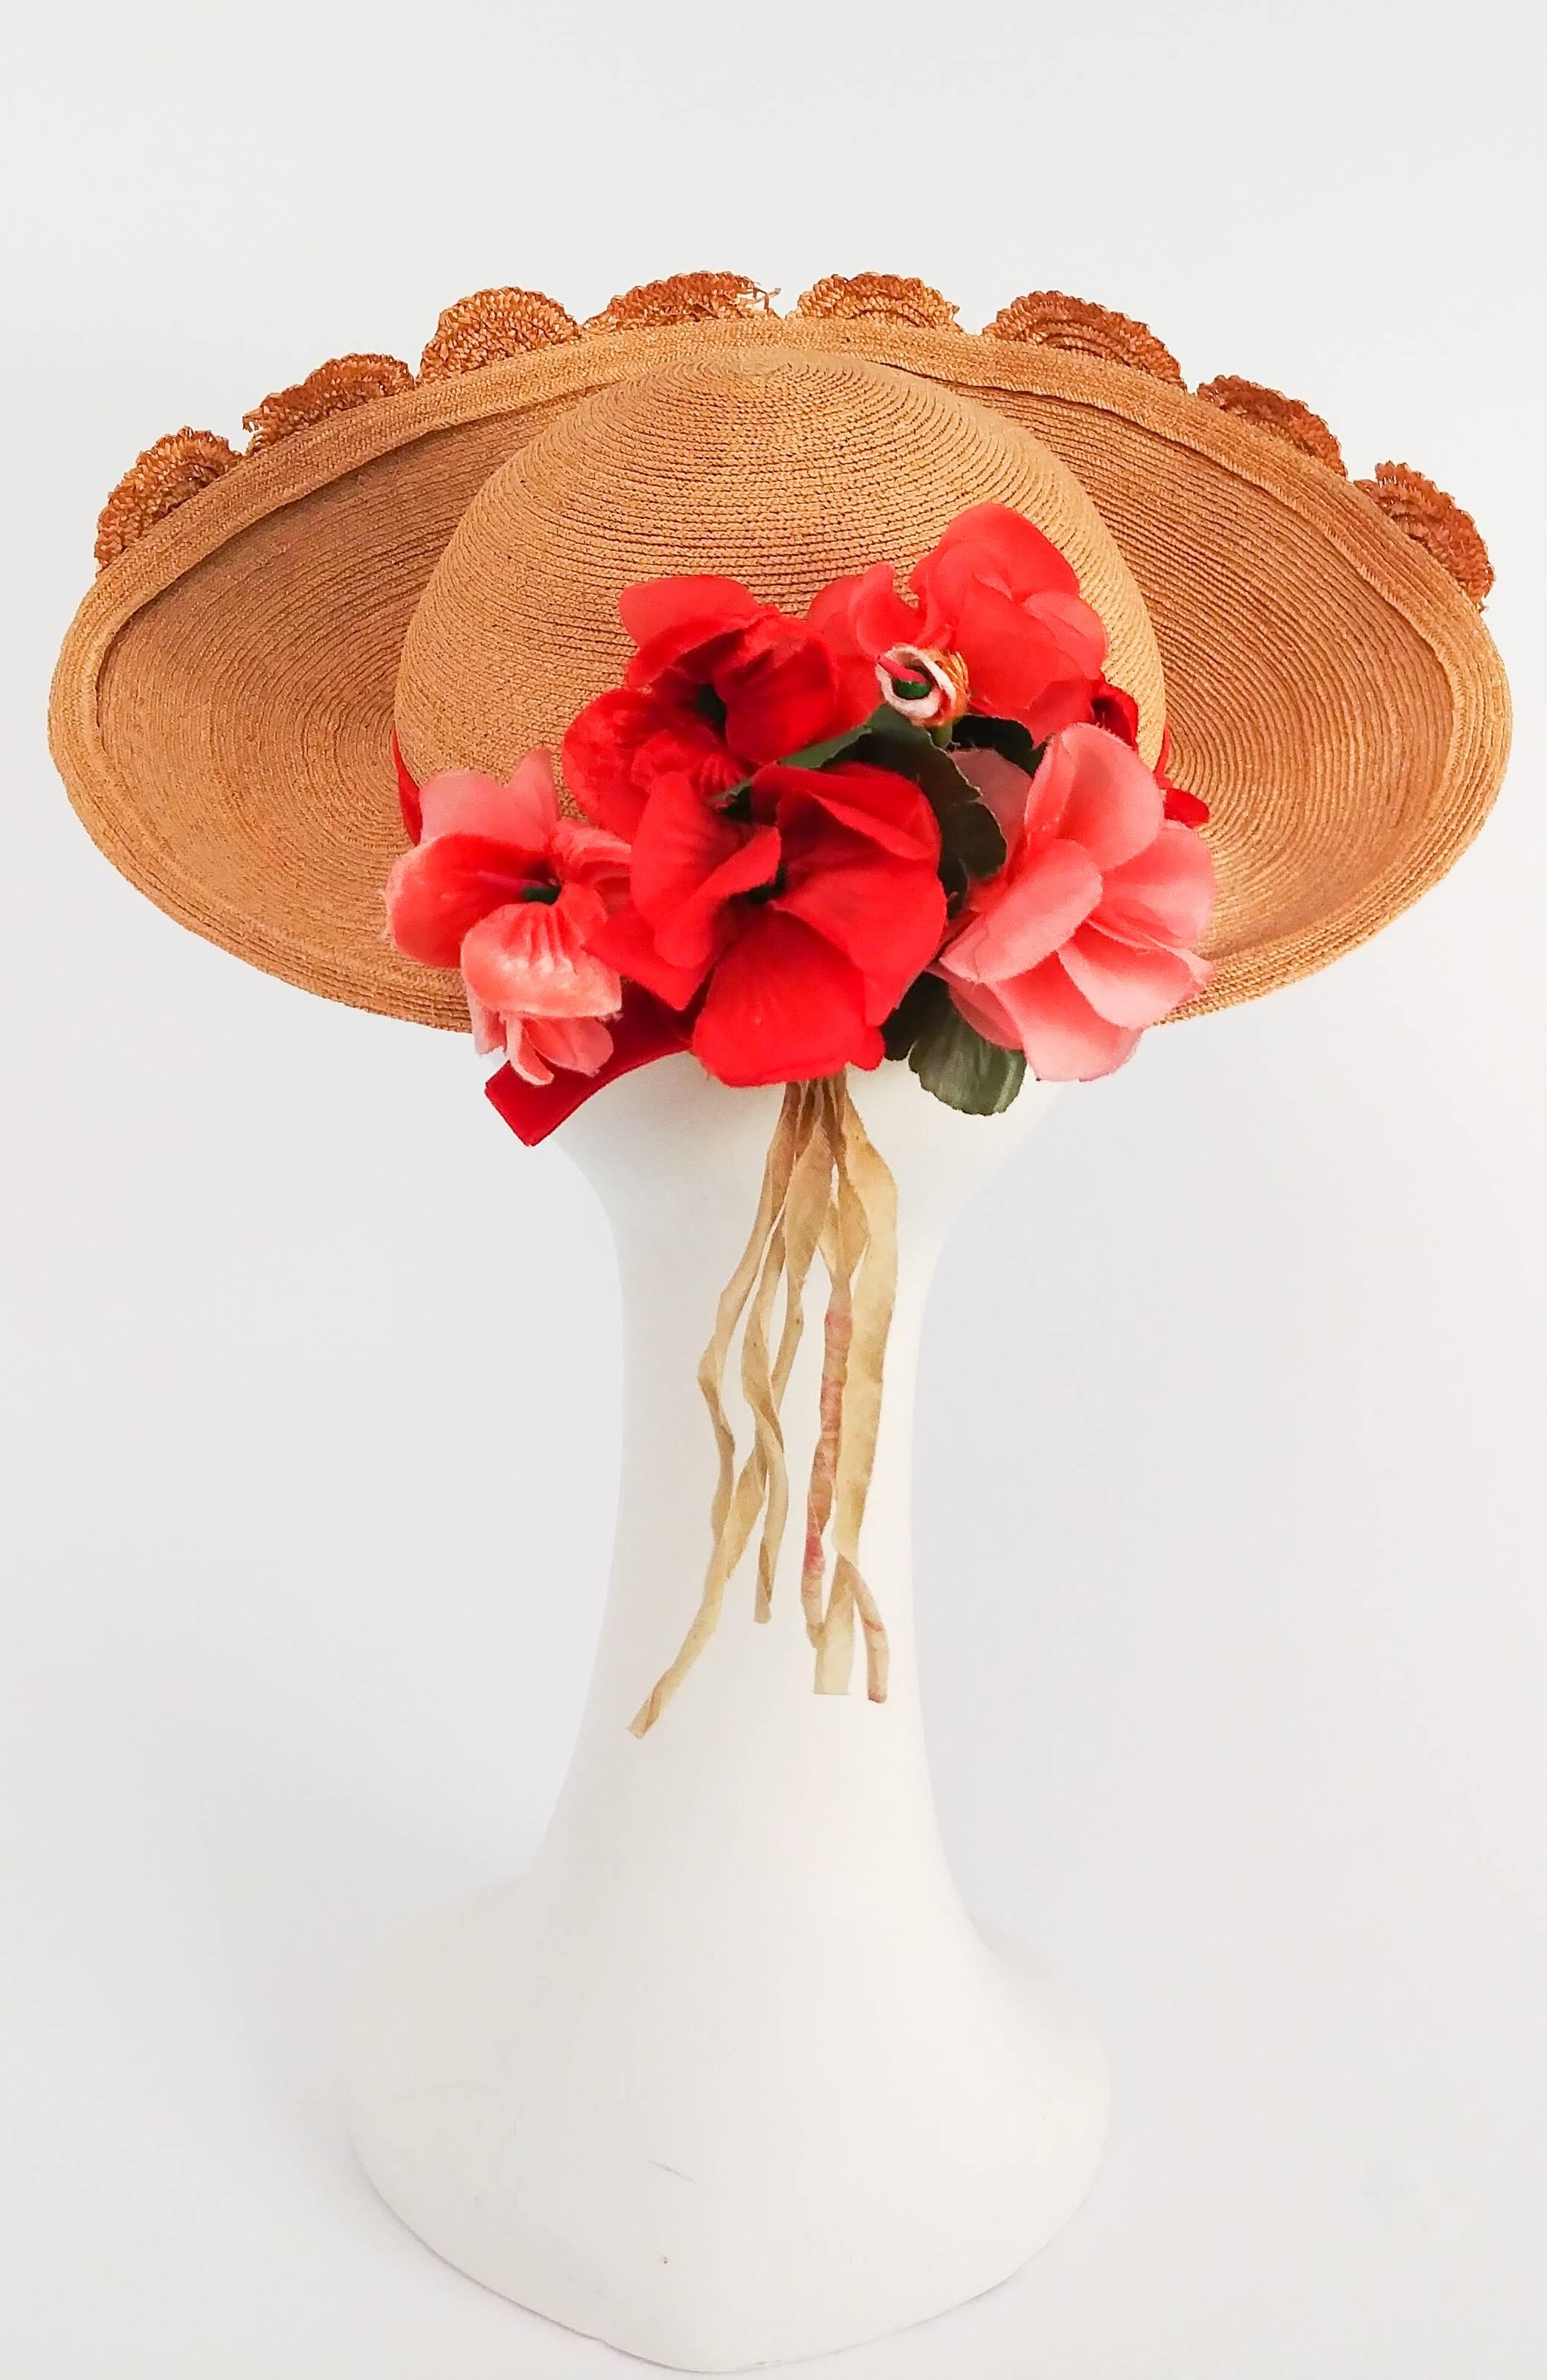 straw hat with red ribbon